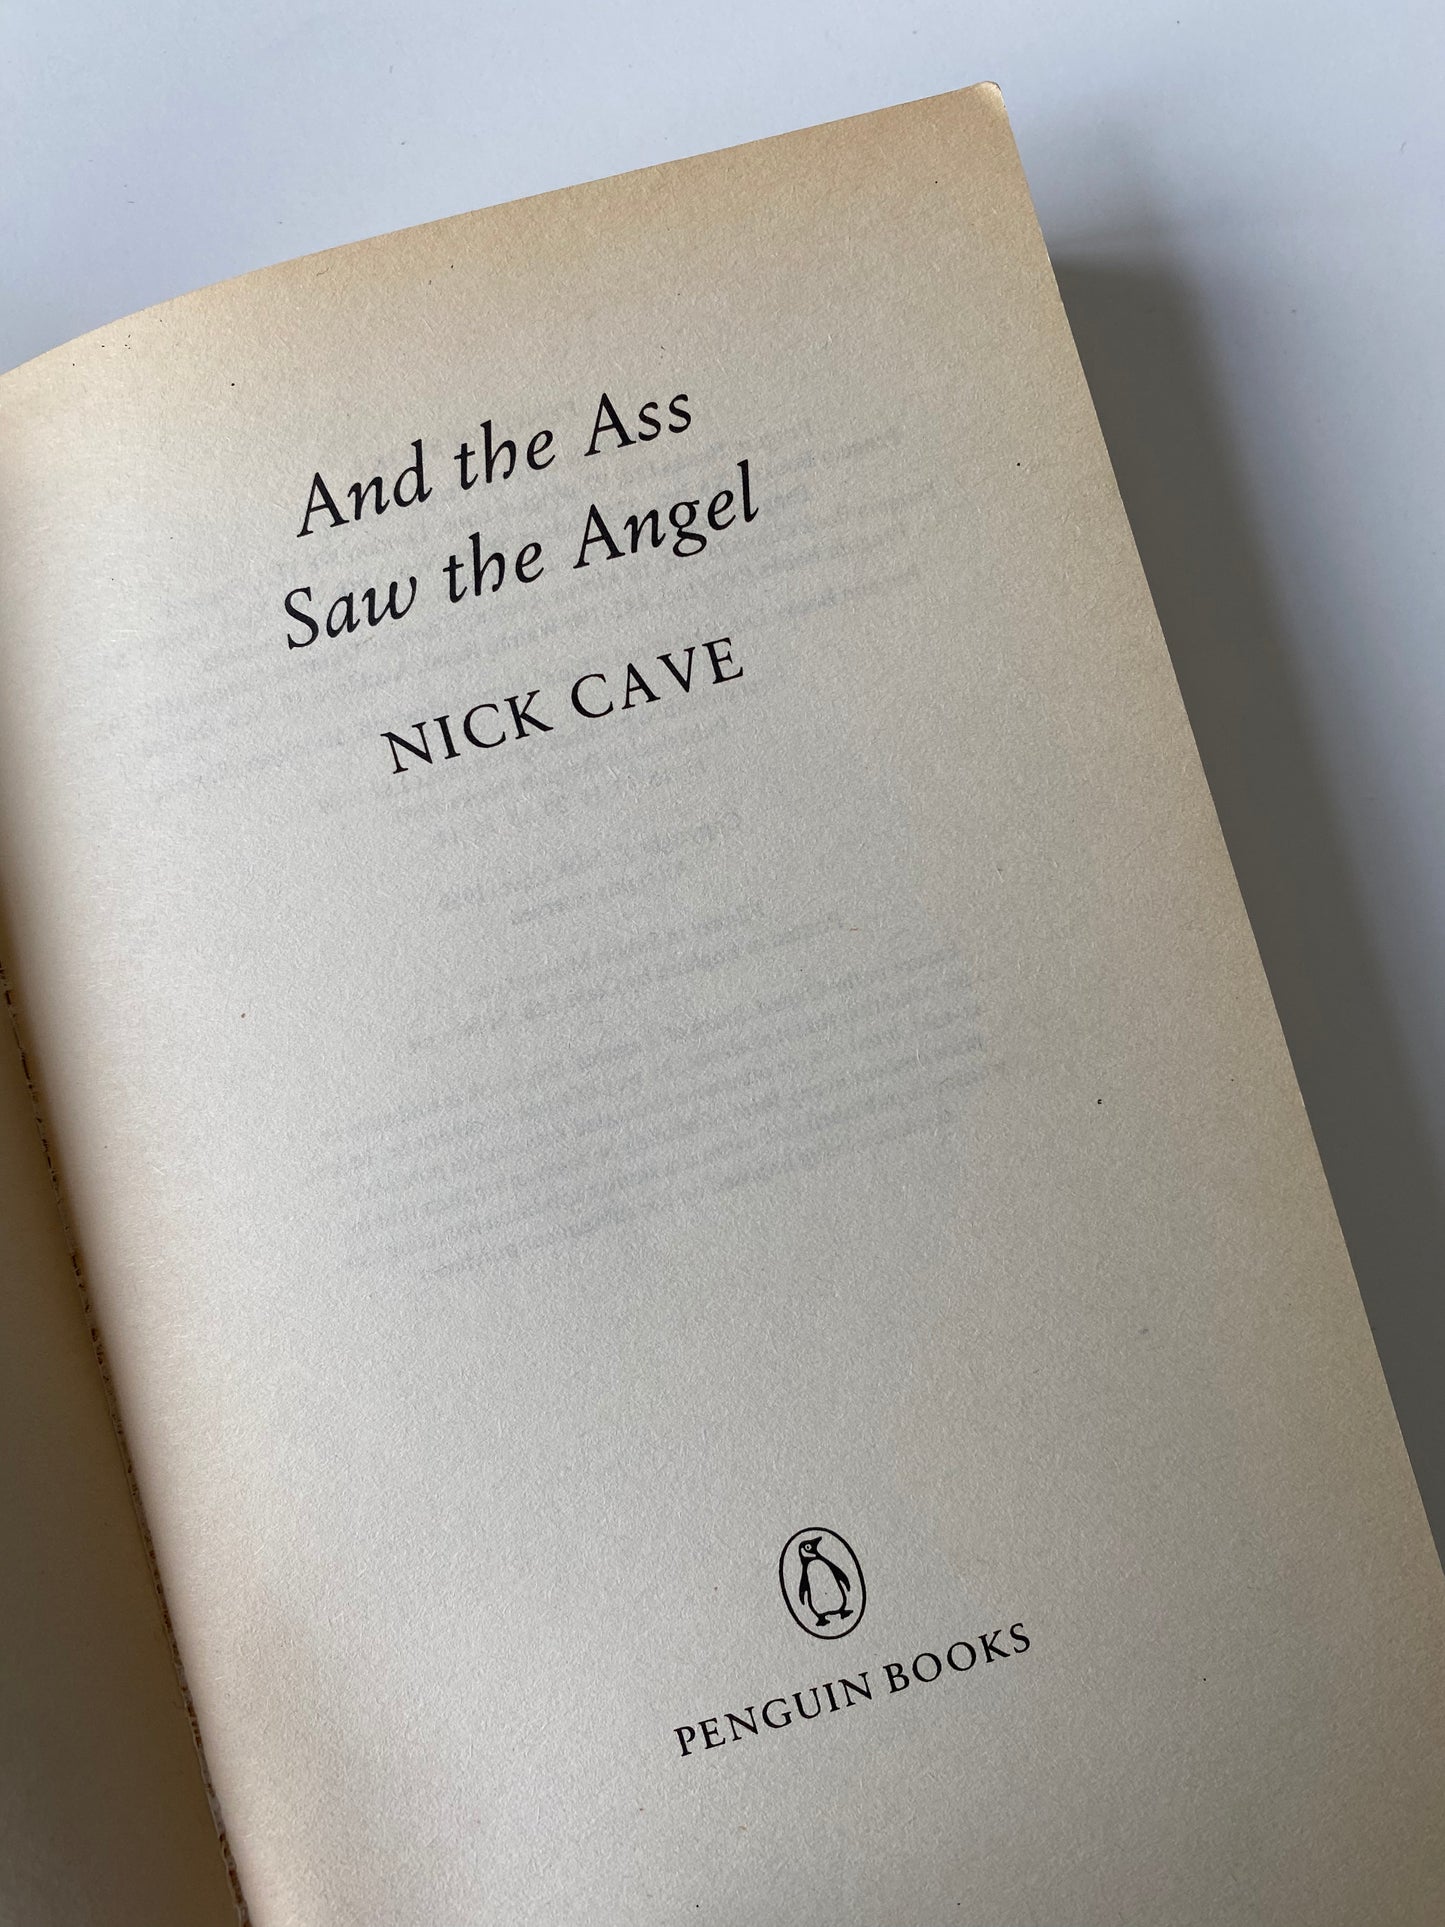 Nick Cave - And The Ass Saw The Angel (1990)